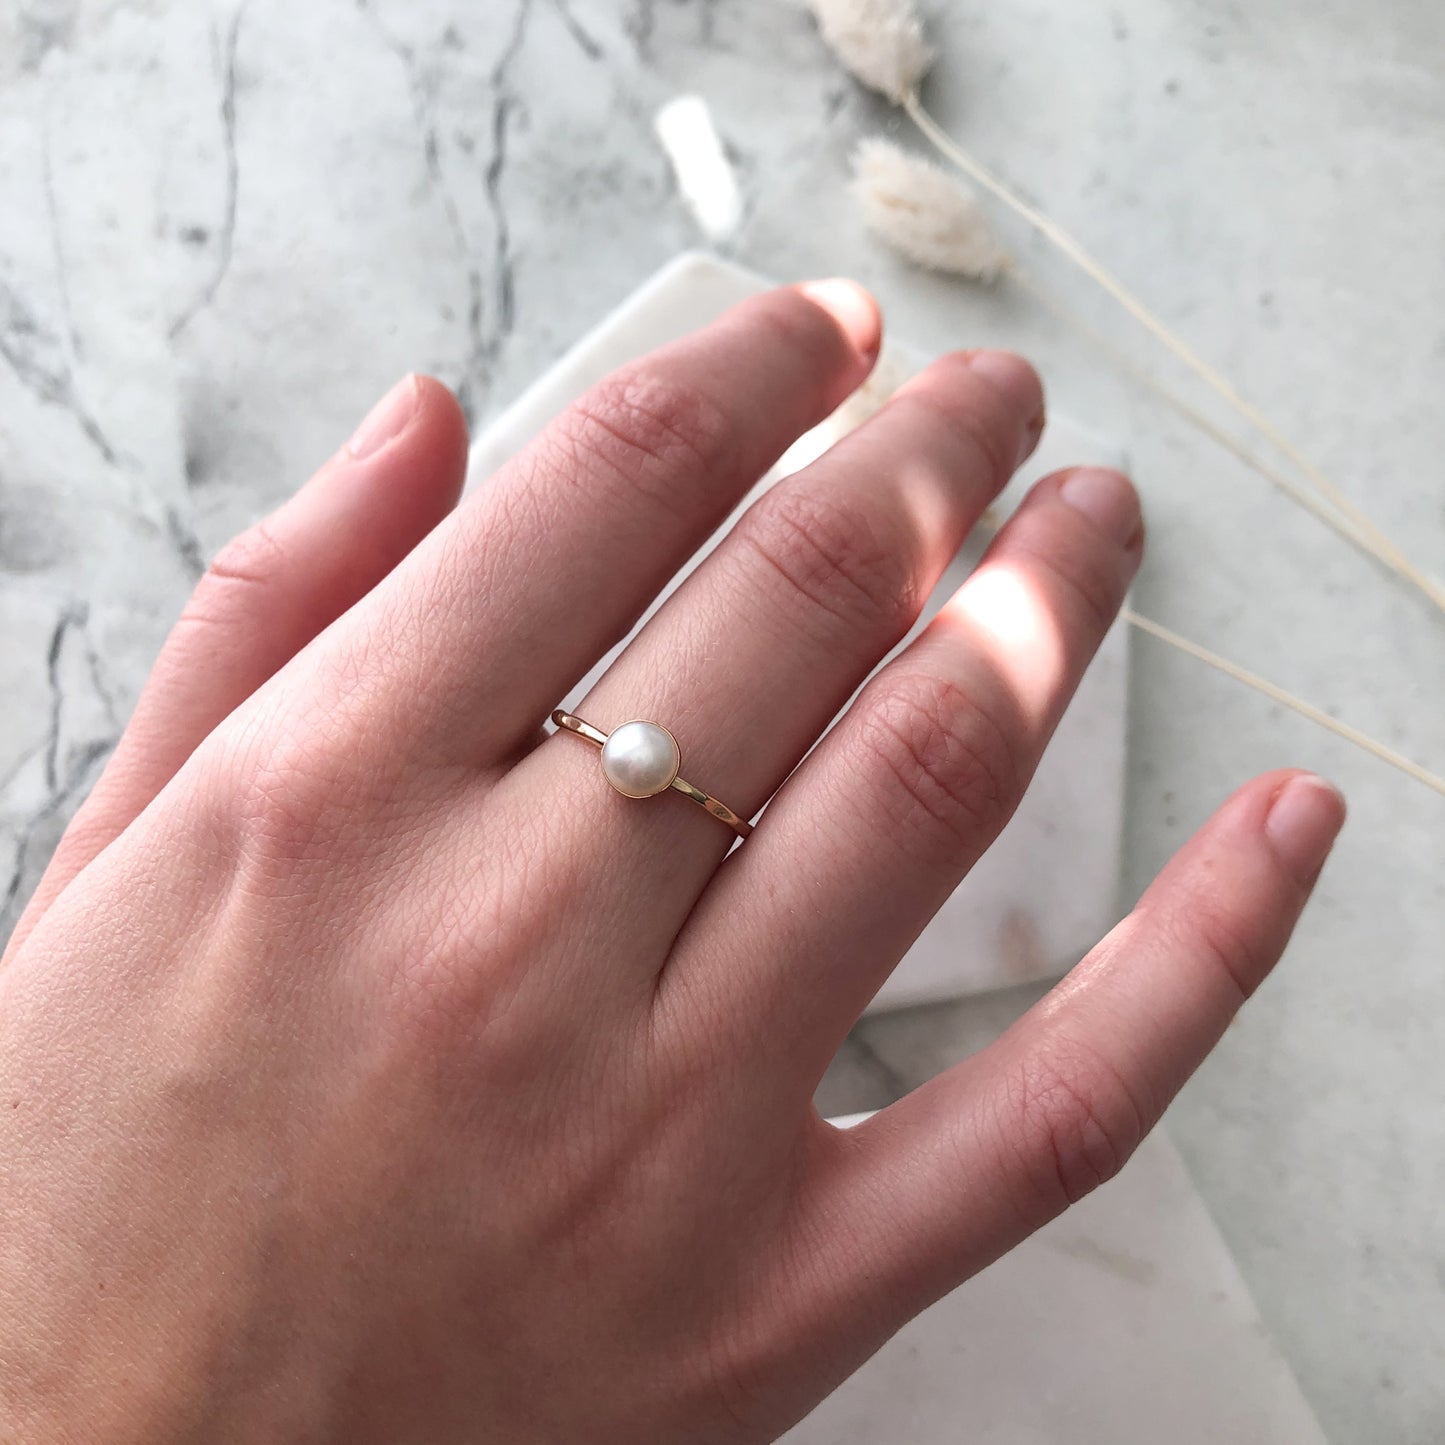 Pearl Stacking Ring - 14k gold-fill